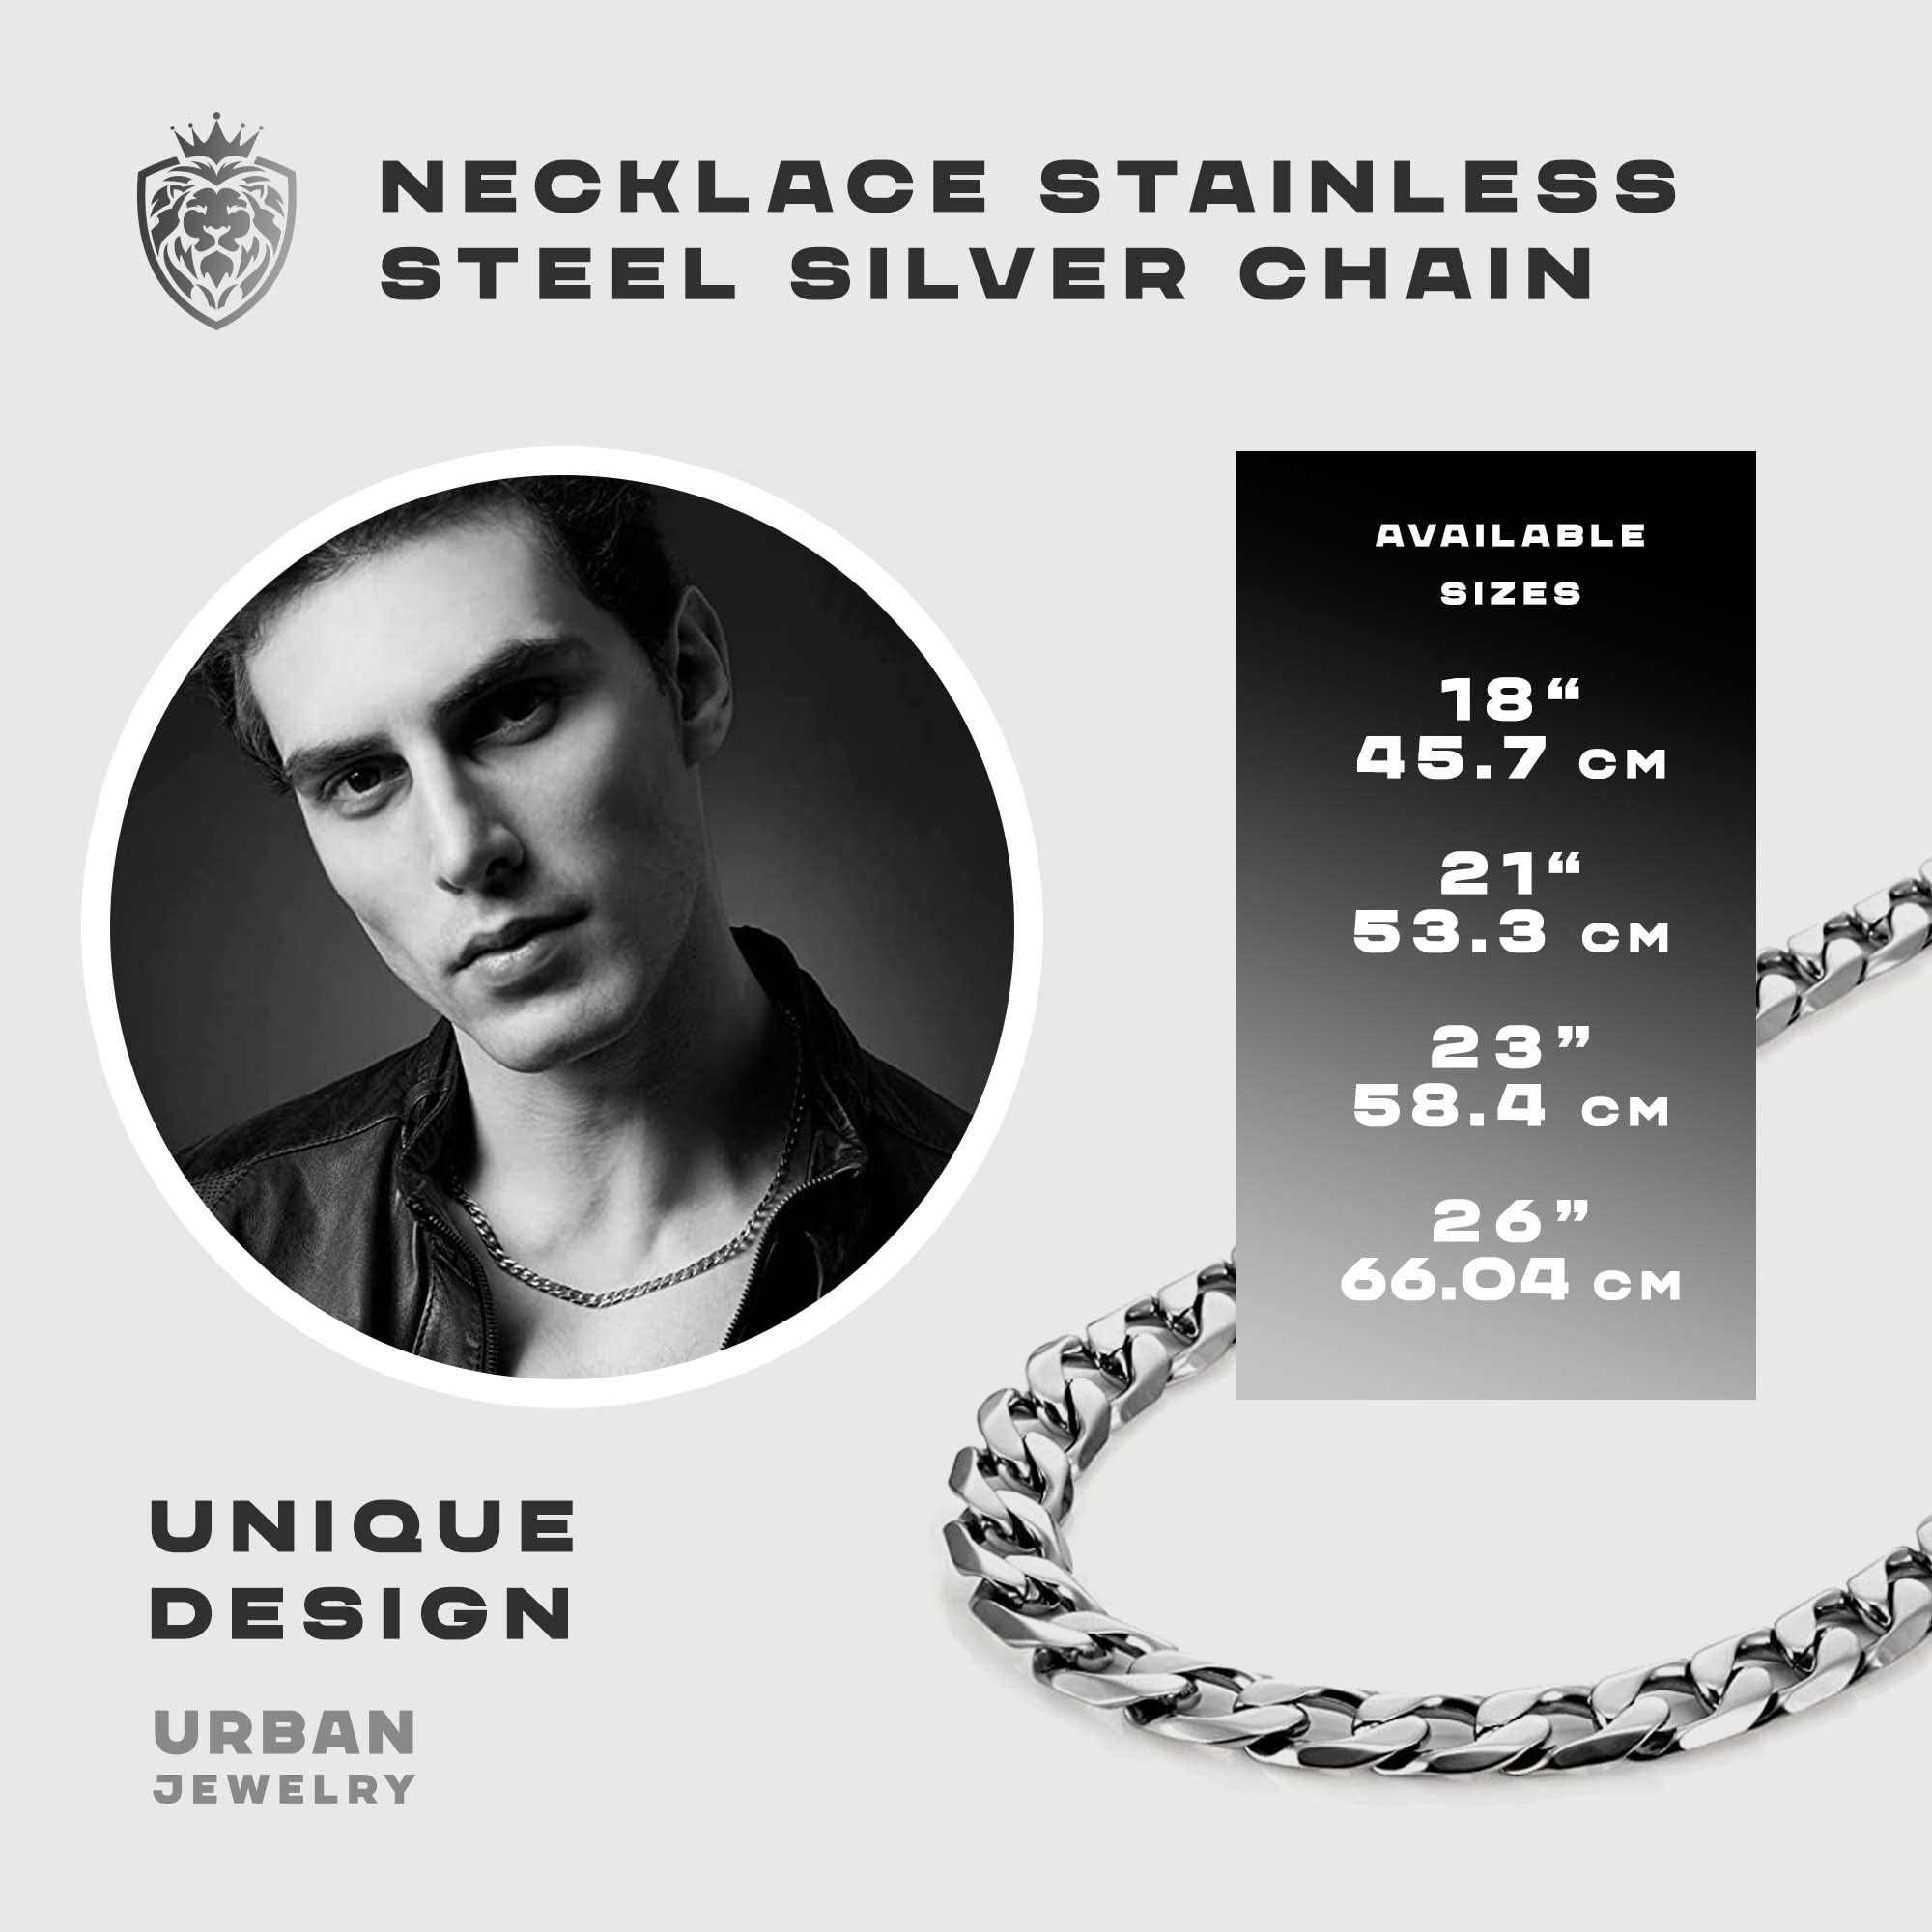 Classic Mens Link Chain Necklace, Cuban Style, Silver, Black or 24K Gold Plated, 316L Stainless Steel Link Chain 19